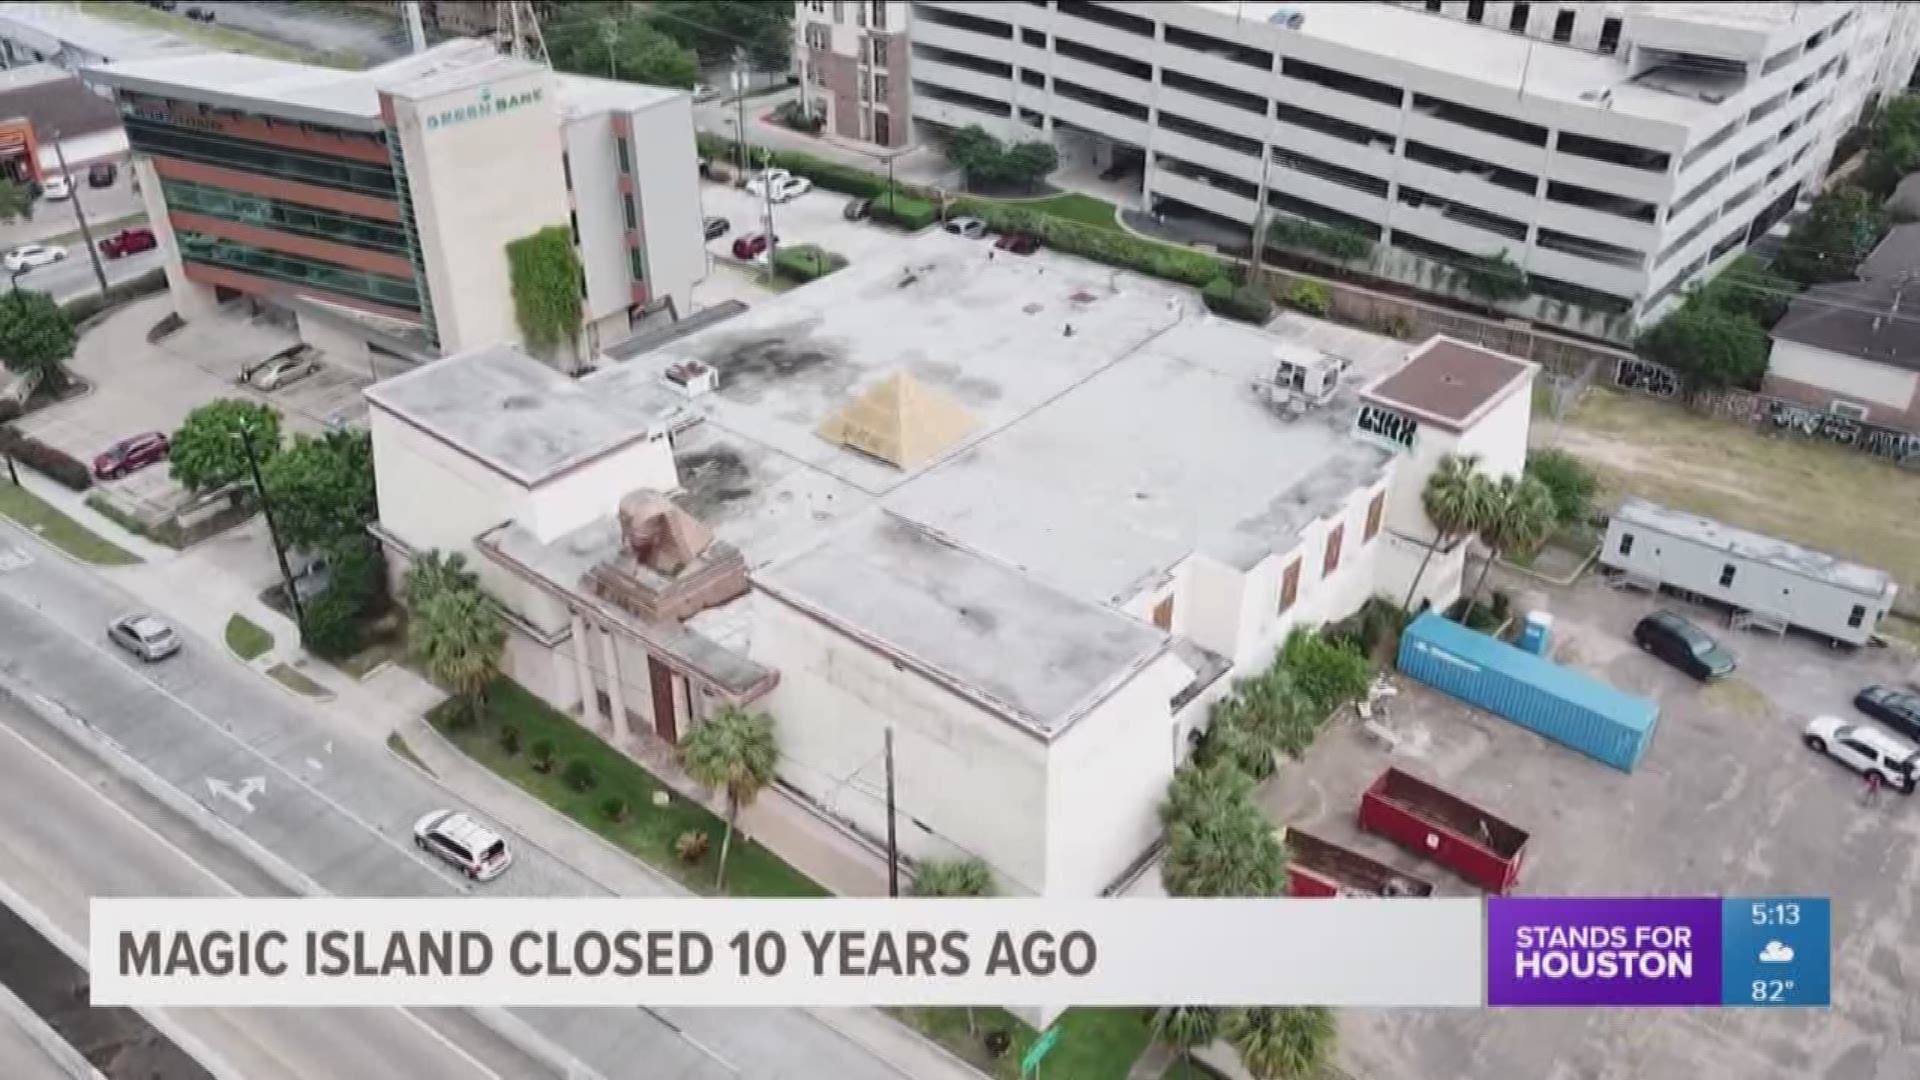 After 10 years, there are plans to reopen Magic Island in Houston.